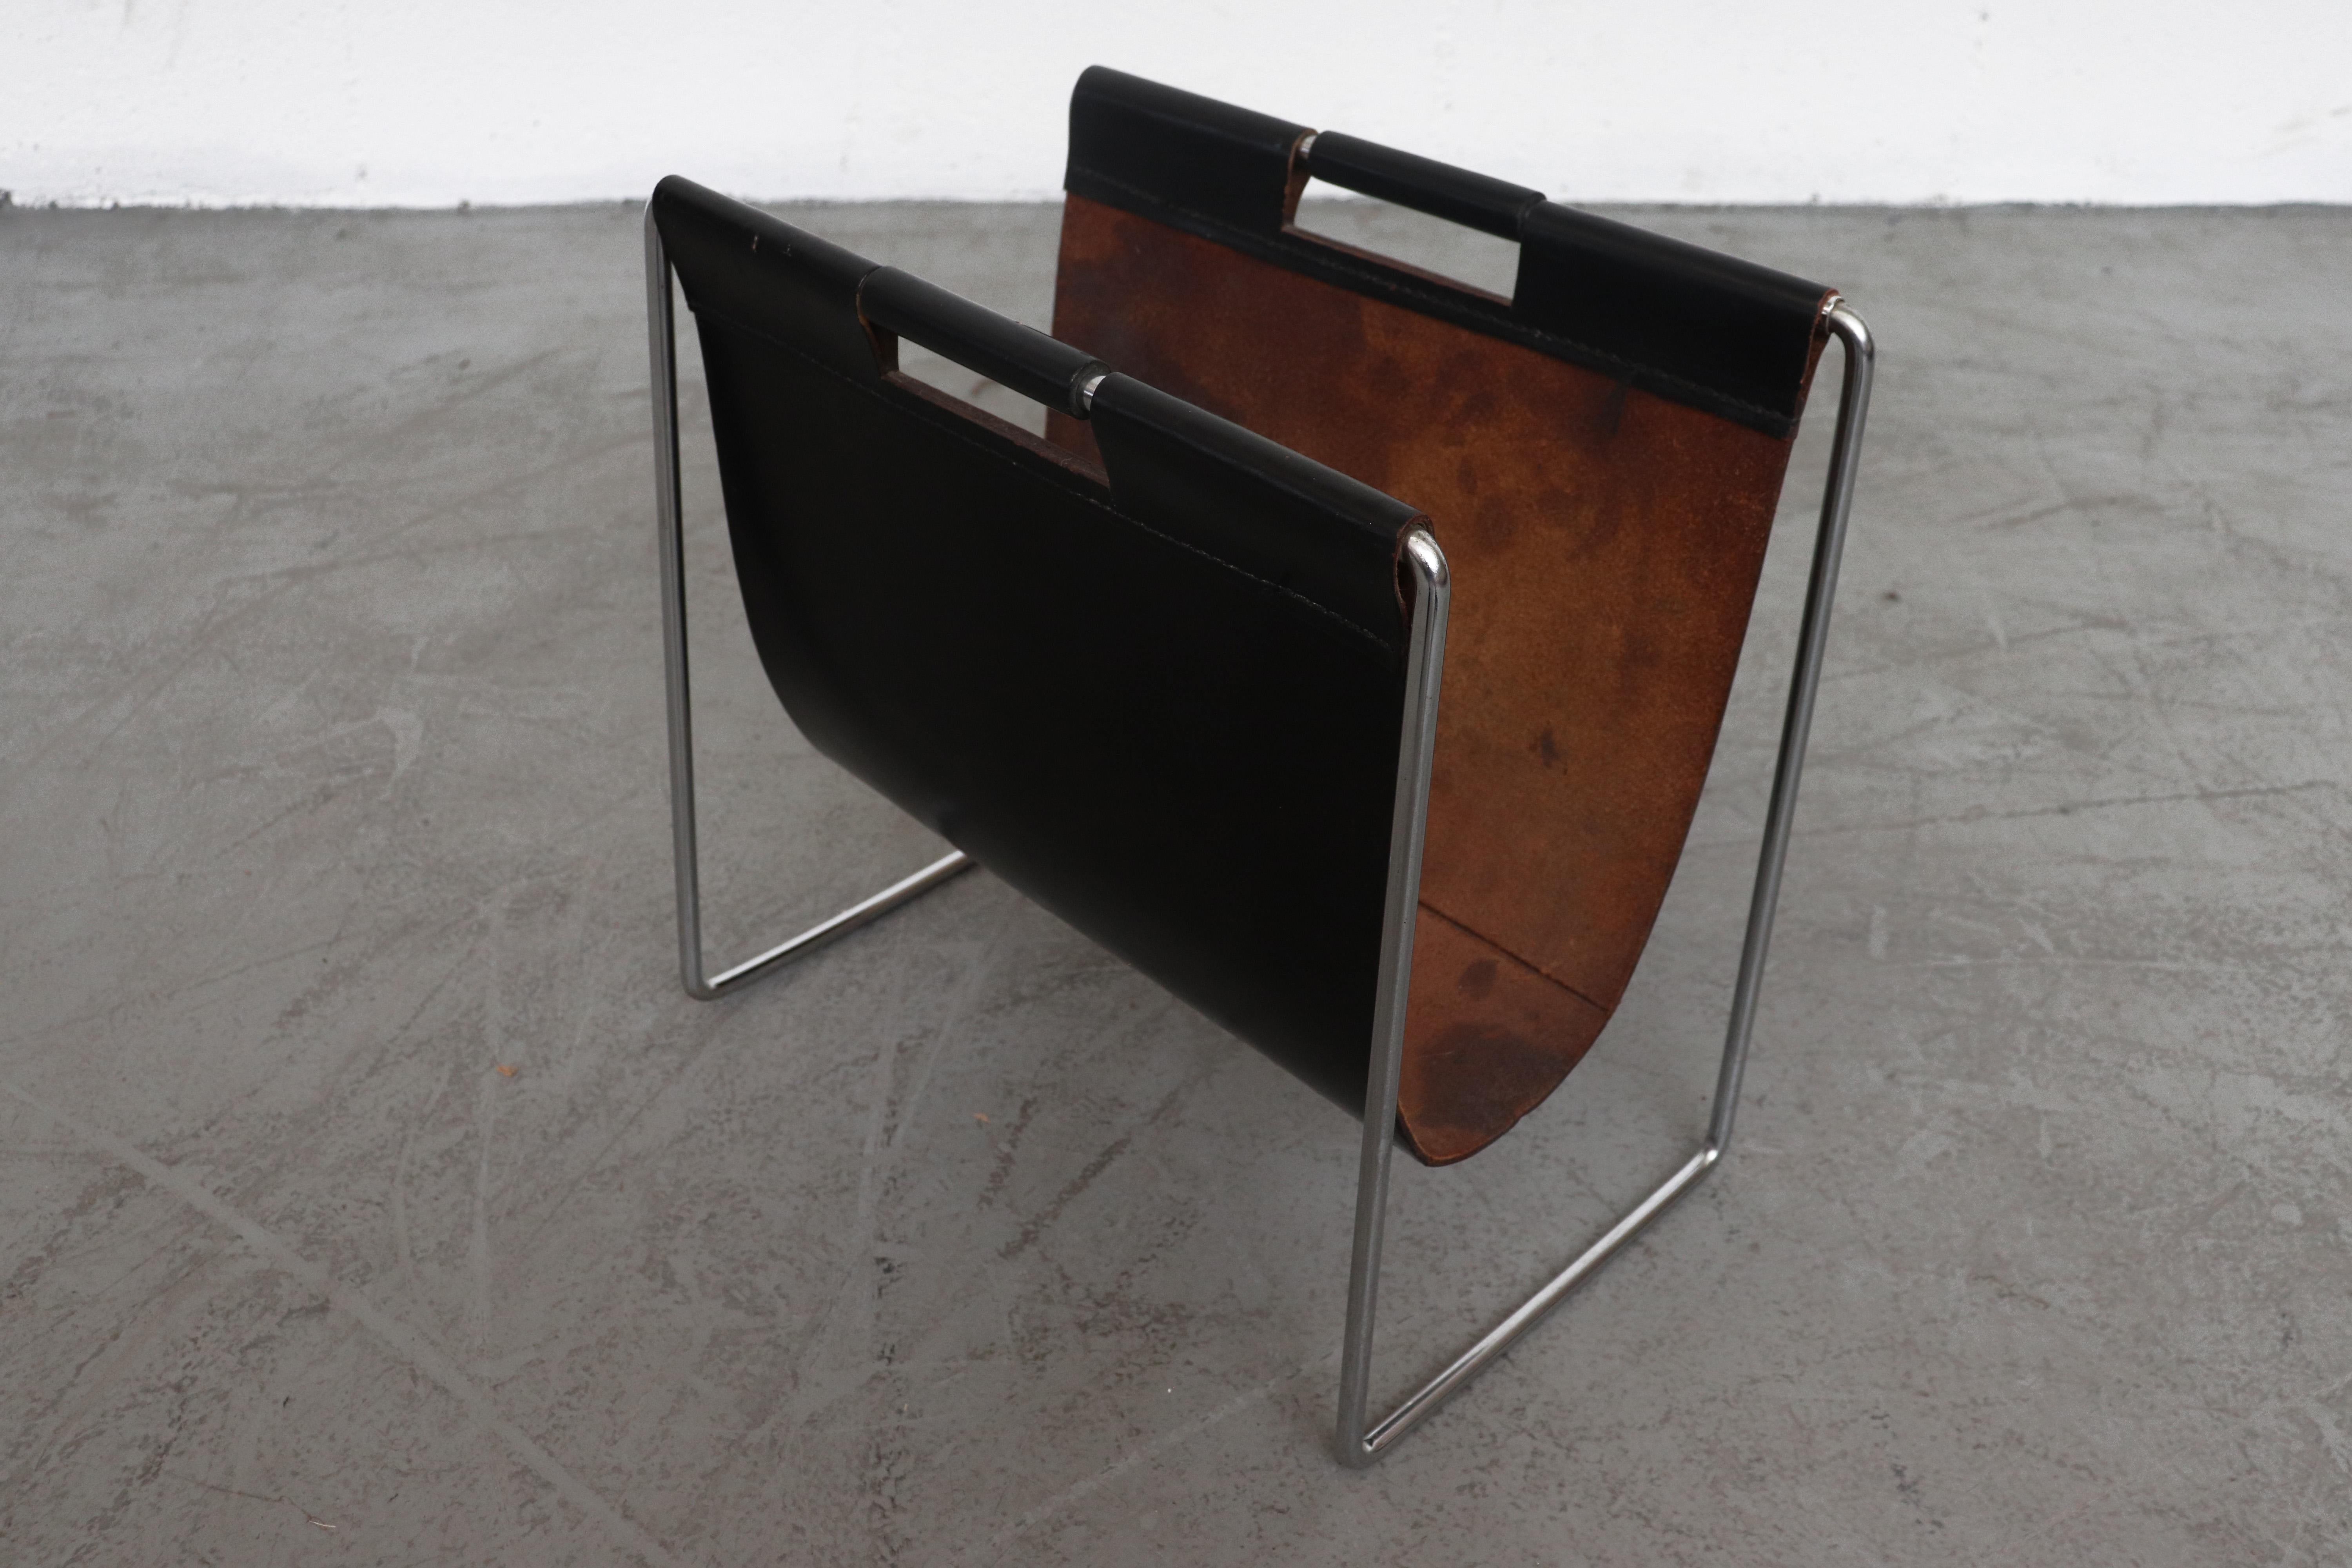 Brabantia black leather magazine stand with chrome legs and ebonized handle grips. In original condition with some signs of visual wear consistent with age and use. Other colors available, listed separately (LU922412846202).